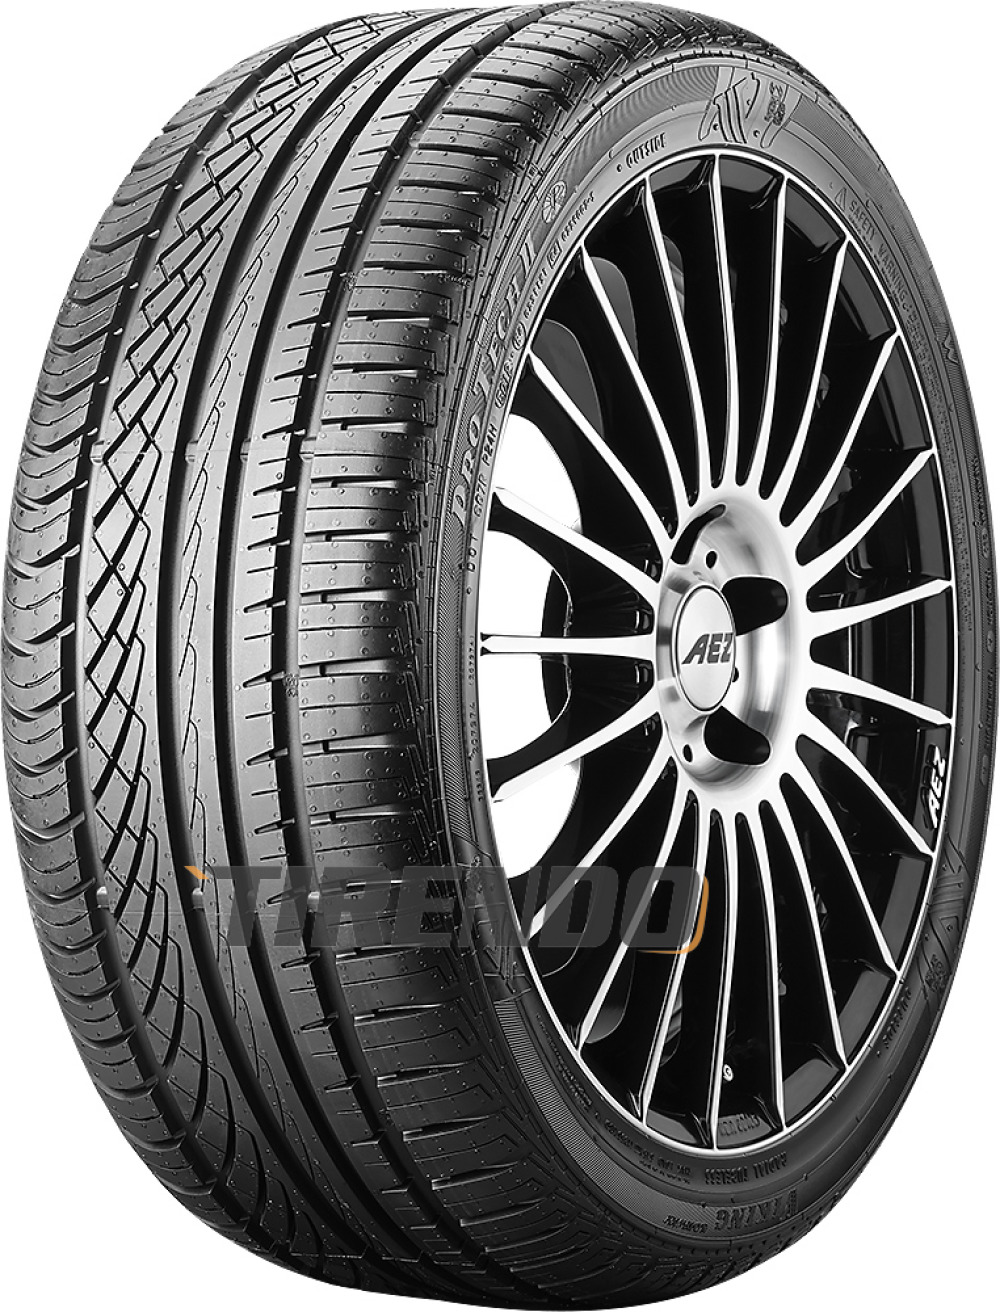 Image of Viking ProTech II ( 185/70 R14 88H )